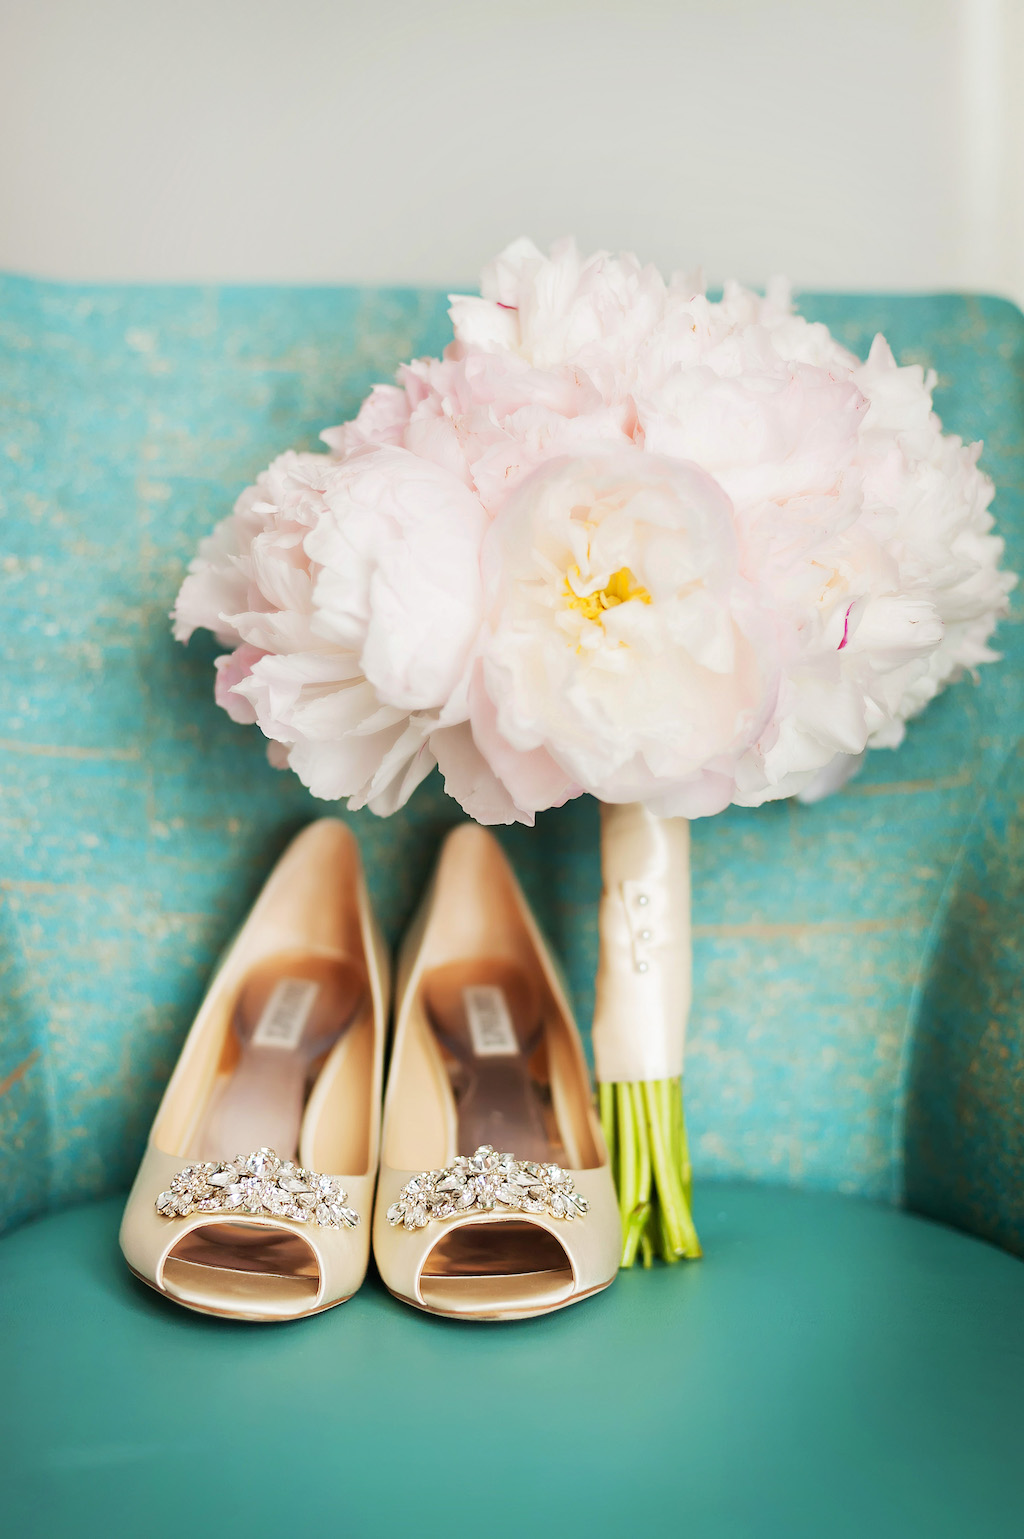 Bride's Gold Wedding Heels on Turquoise Couch with Blush Pink Peonies Bouquet Wrapped in Silk Ribbon